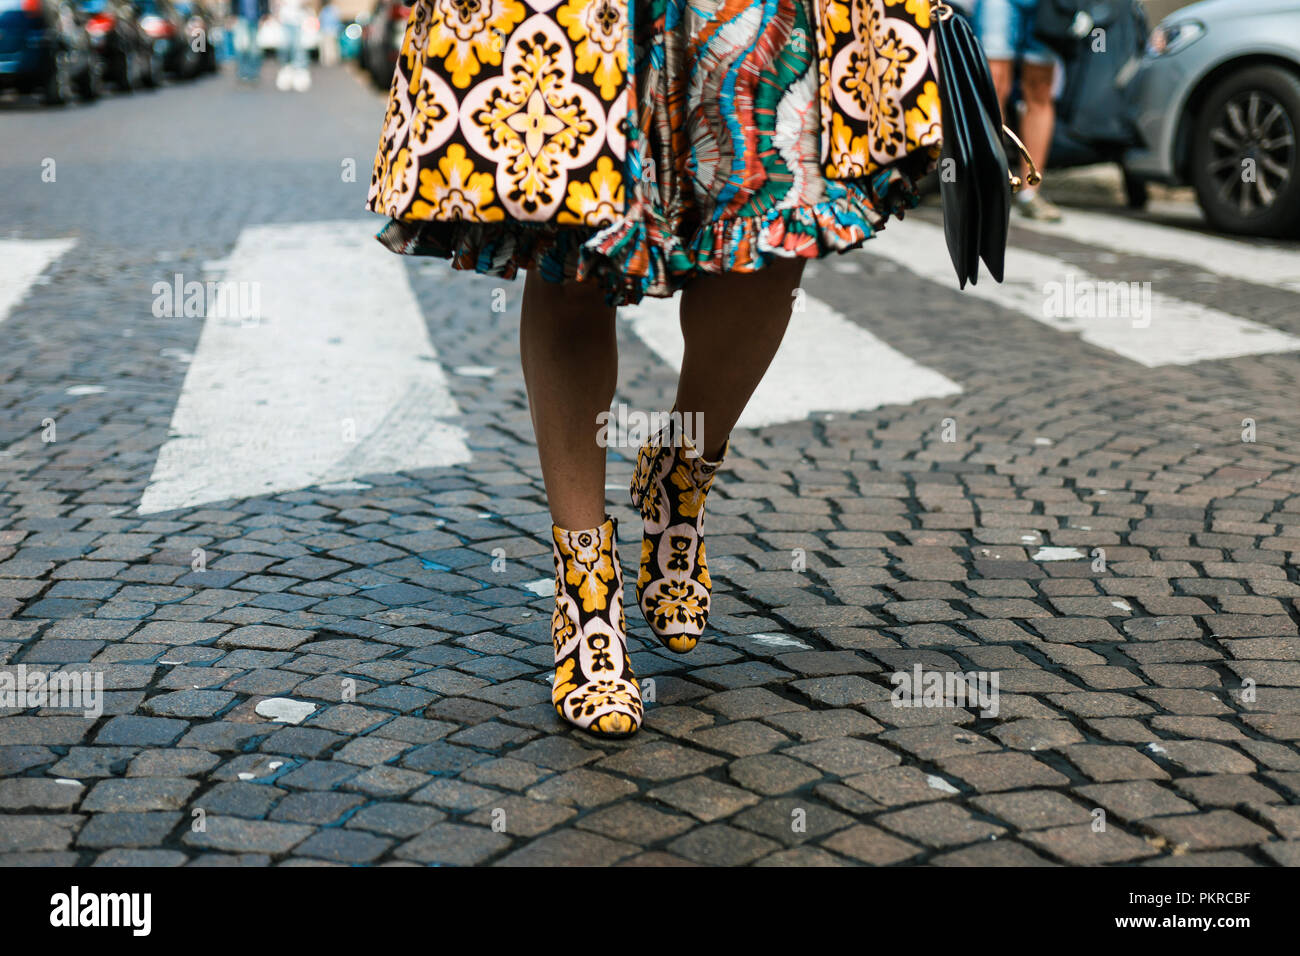 MILAN - SEPTEMBER 23: Man with Louis Vuitton backpack and shirt with flames  before Antonio Marras fashion show, Milan Fashion Week street style on Sep  Stock Photo - Alamy